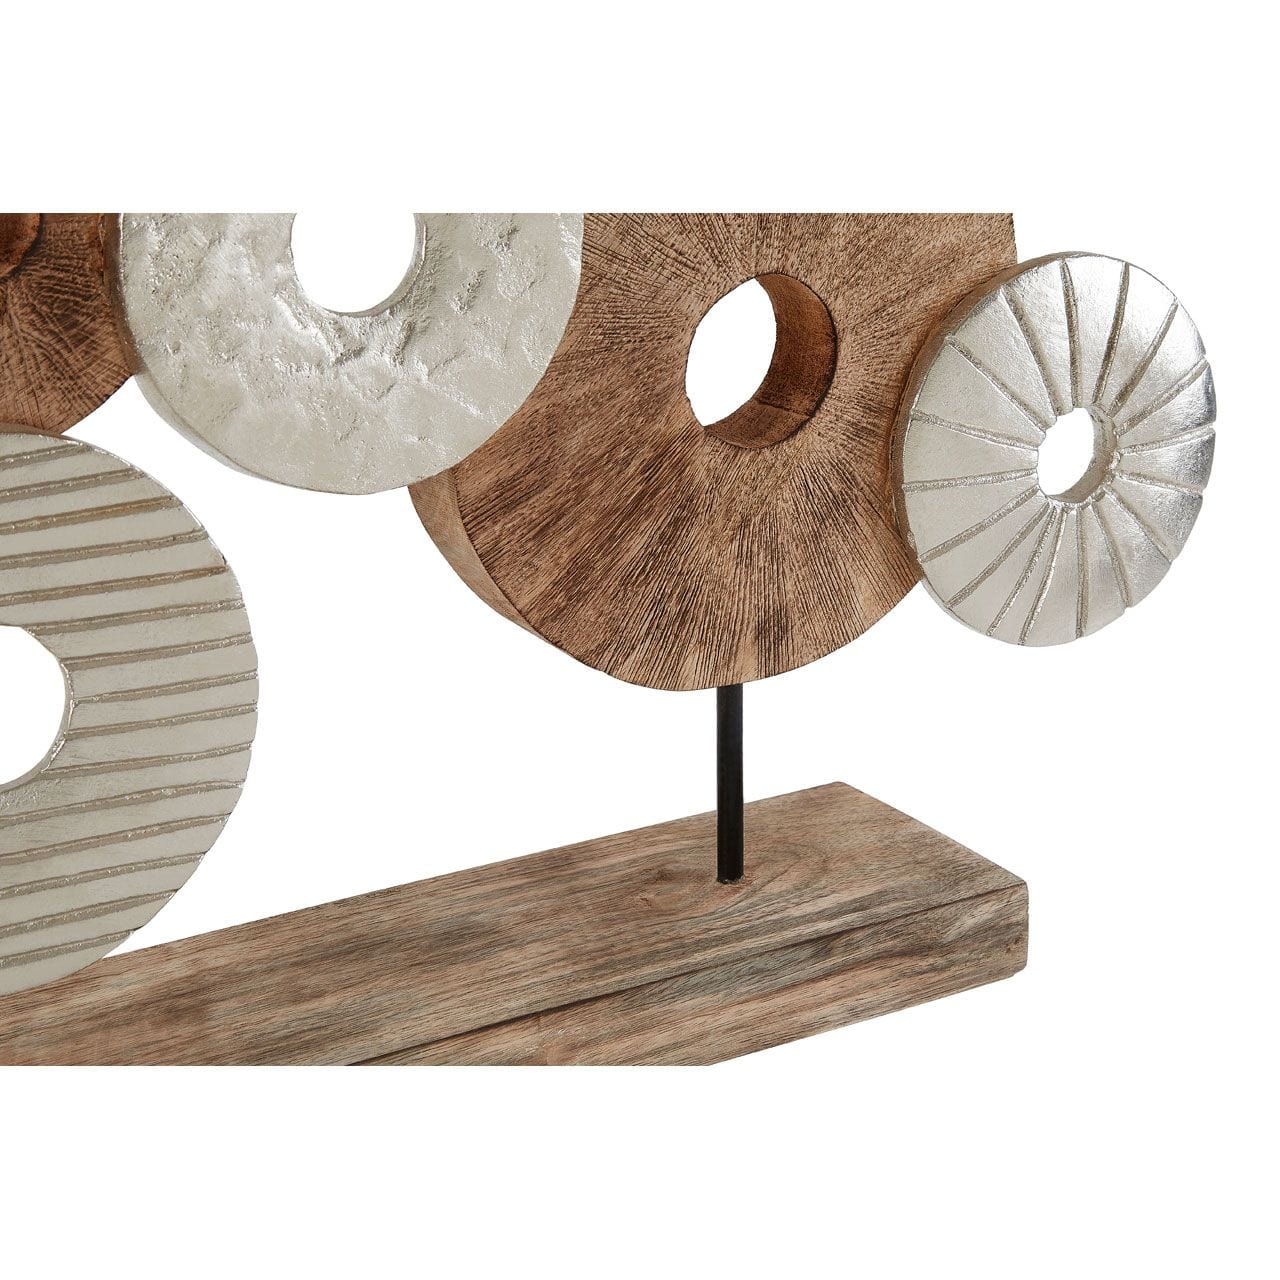 Noosa & Co. Accessories Elementi 7 Disc Wooden Sculpture House of Isabella UK